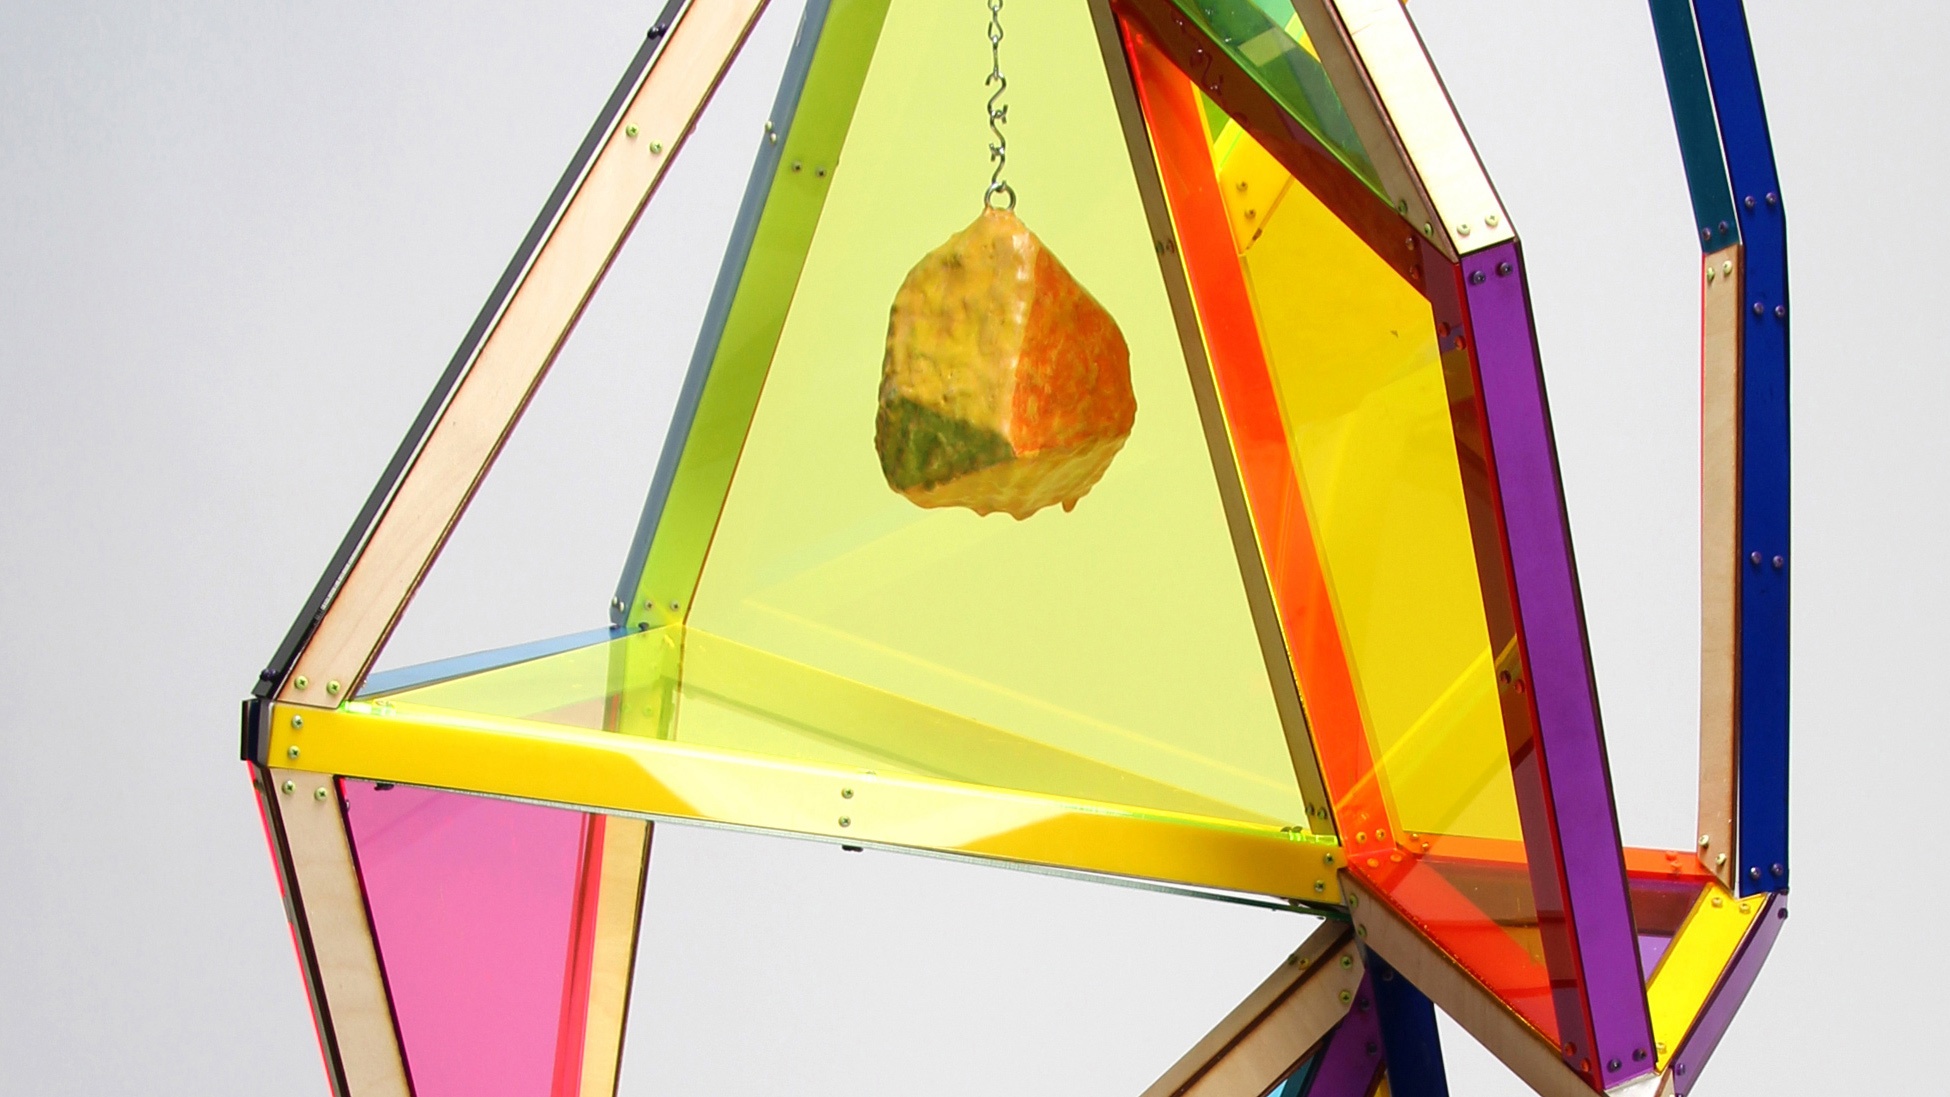 A colorful, geometric sculpture against a light gray background.